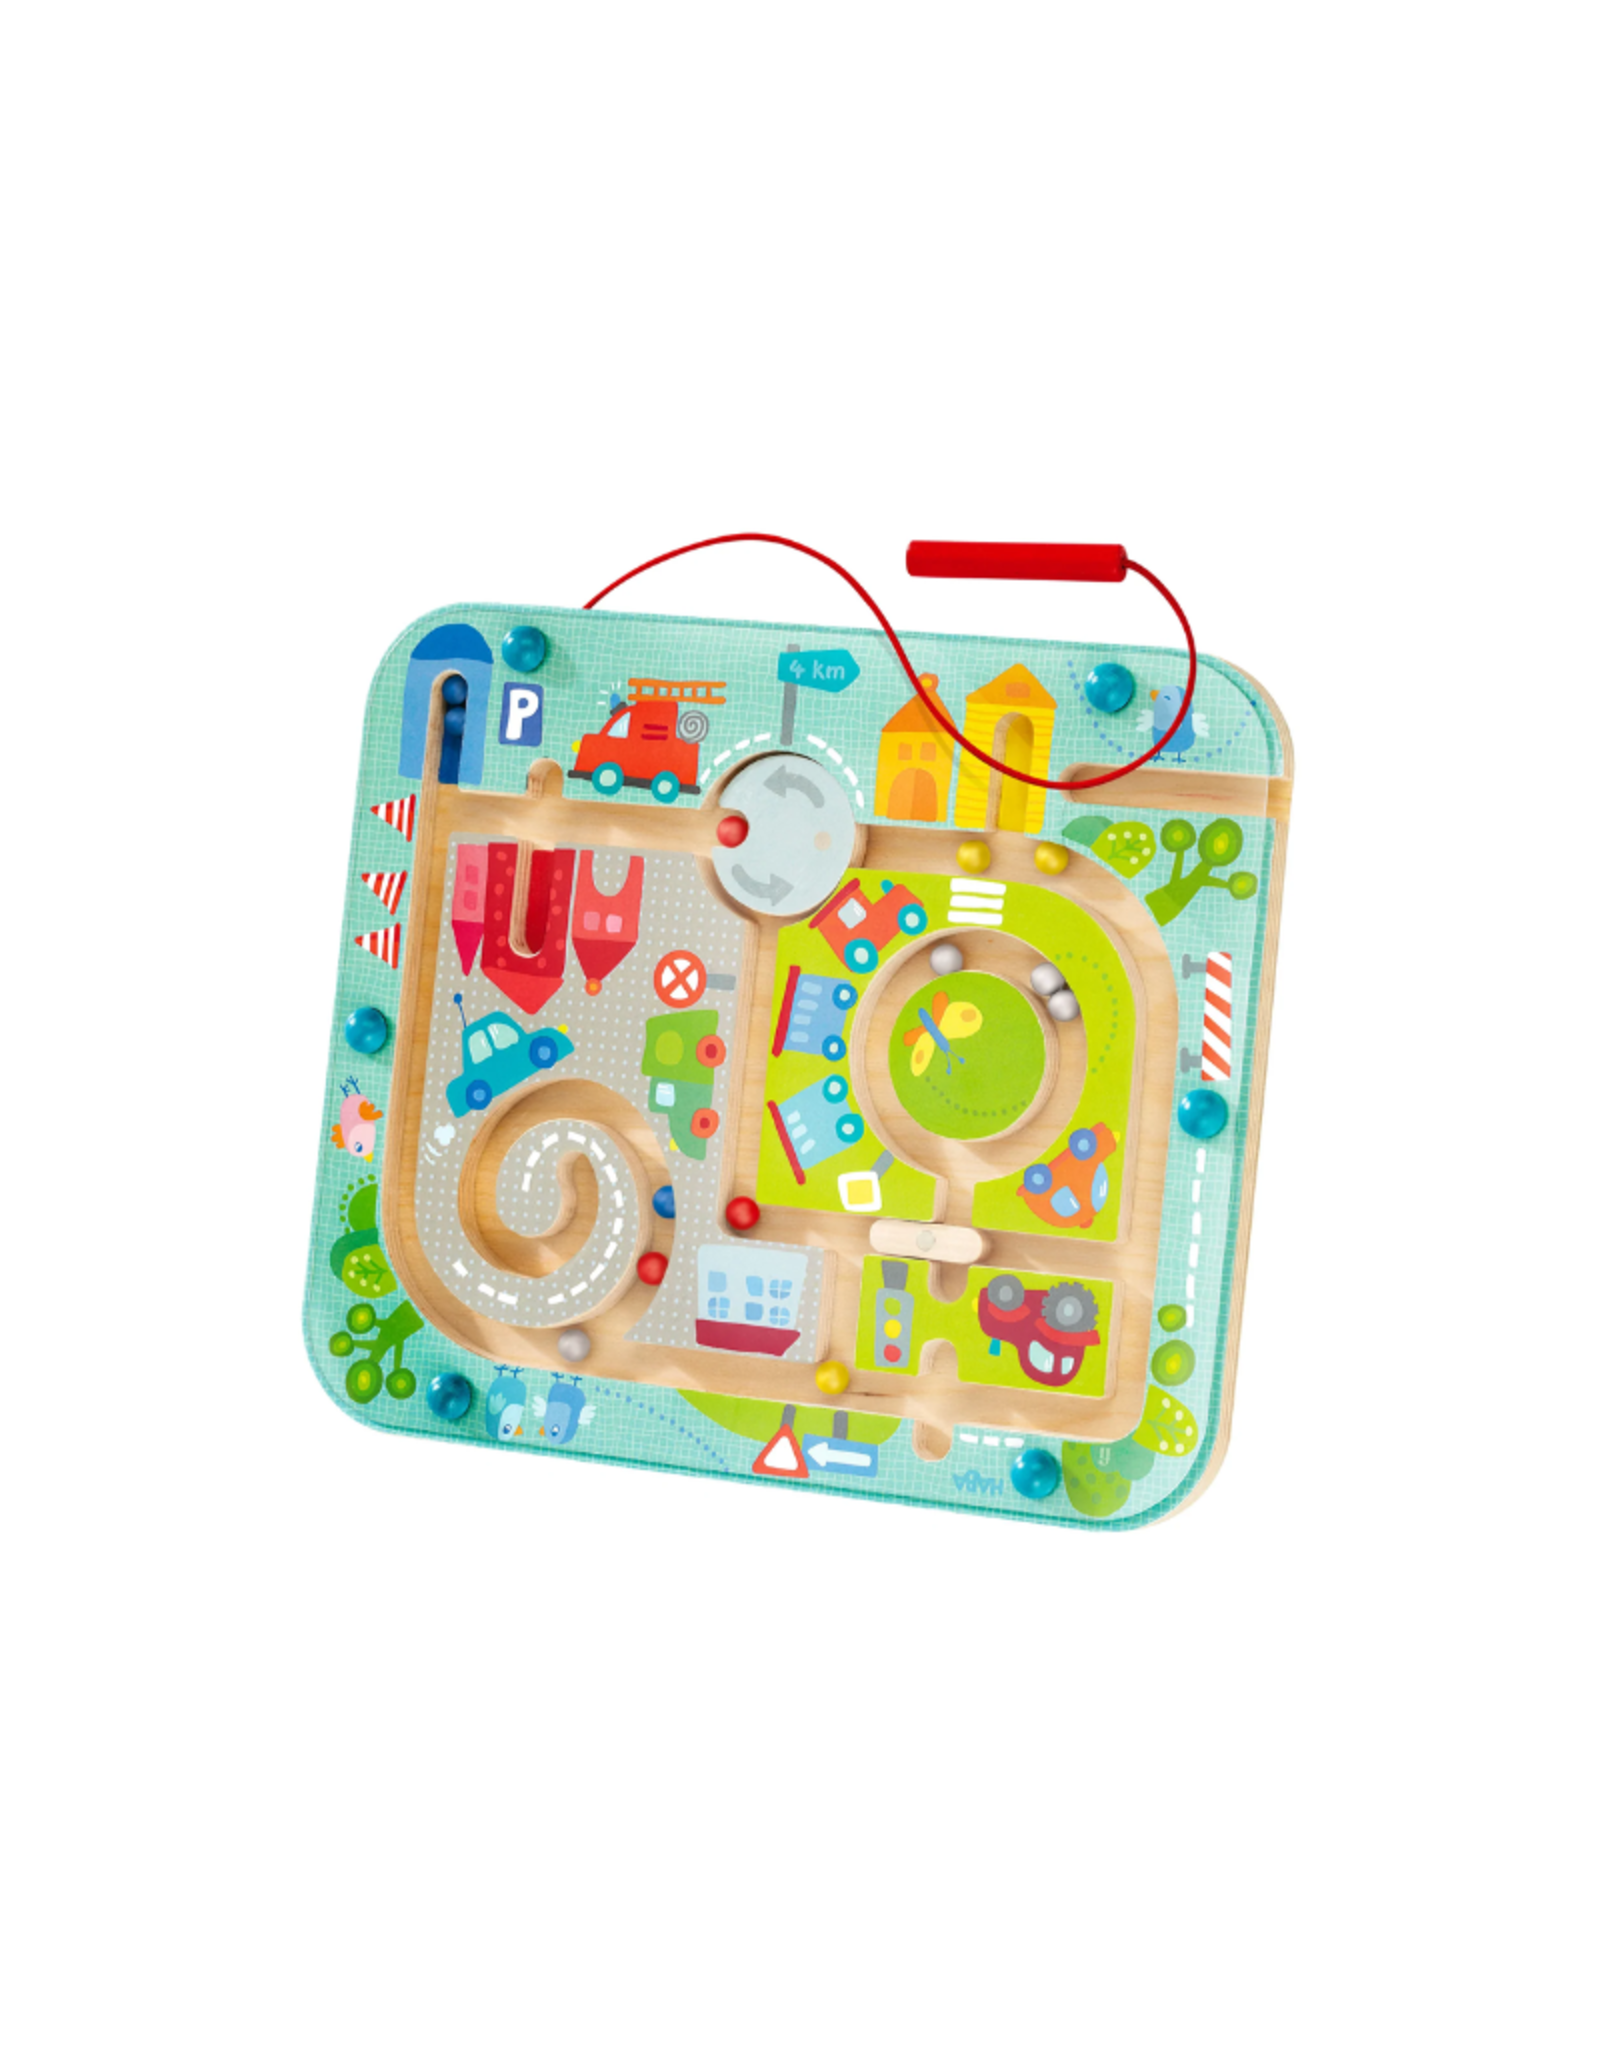 HABA Magnetic Game Town Maze